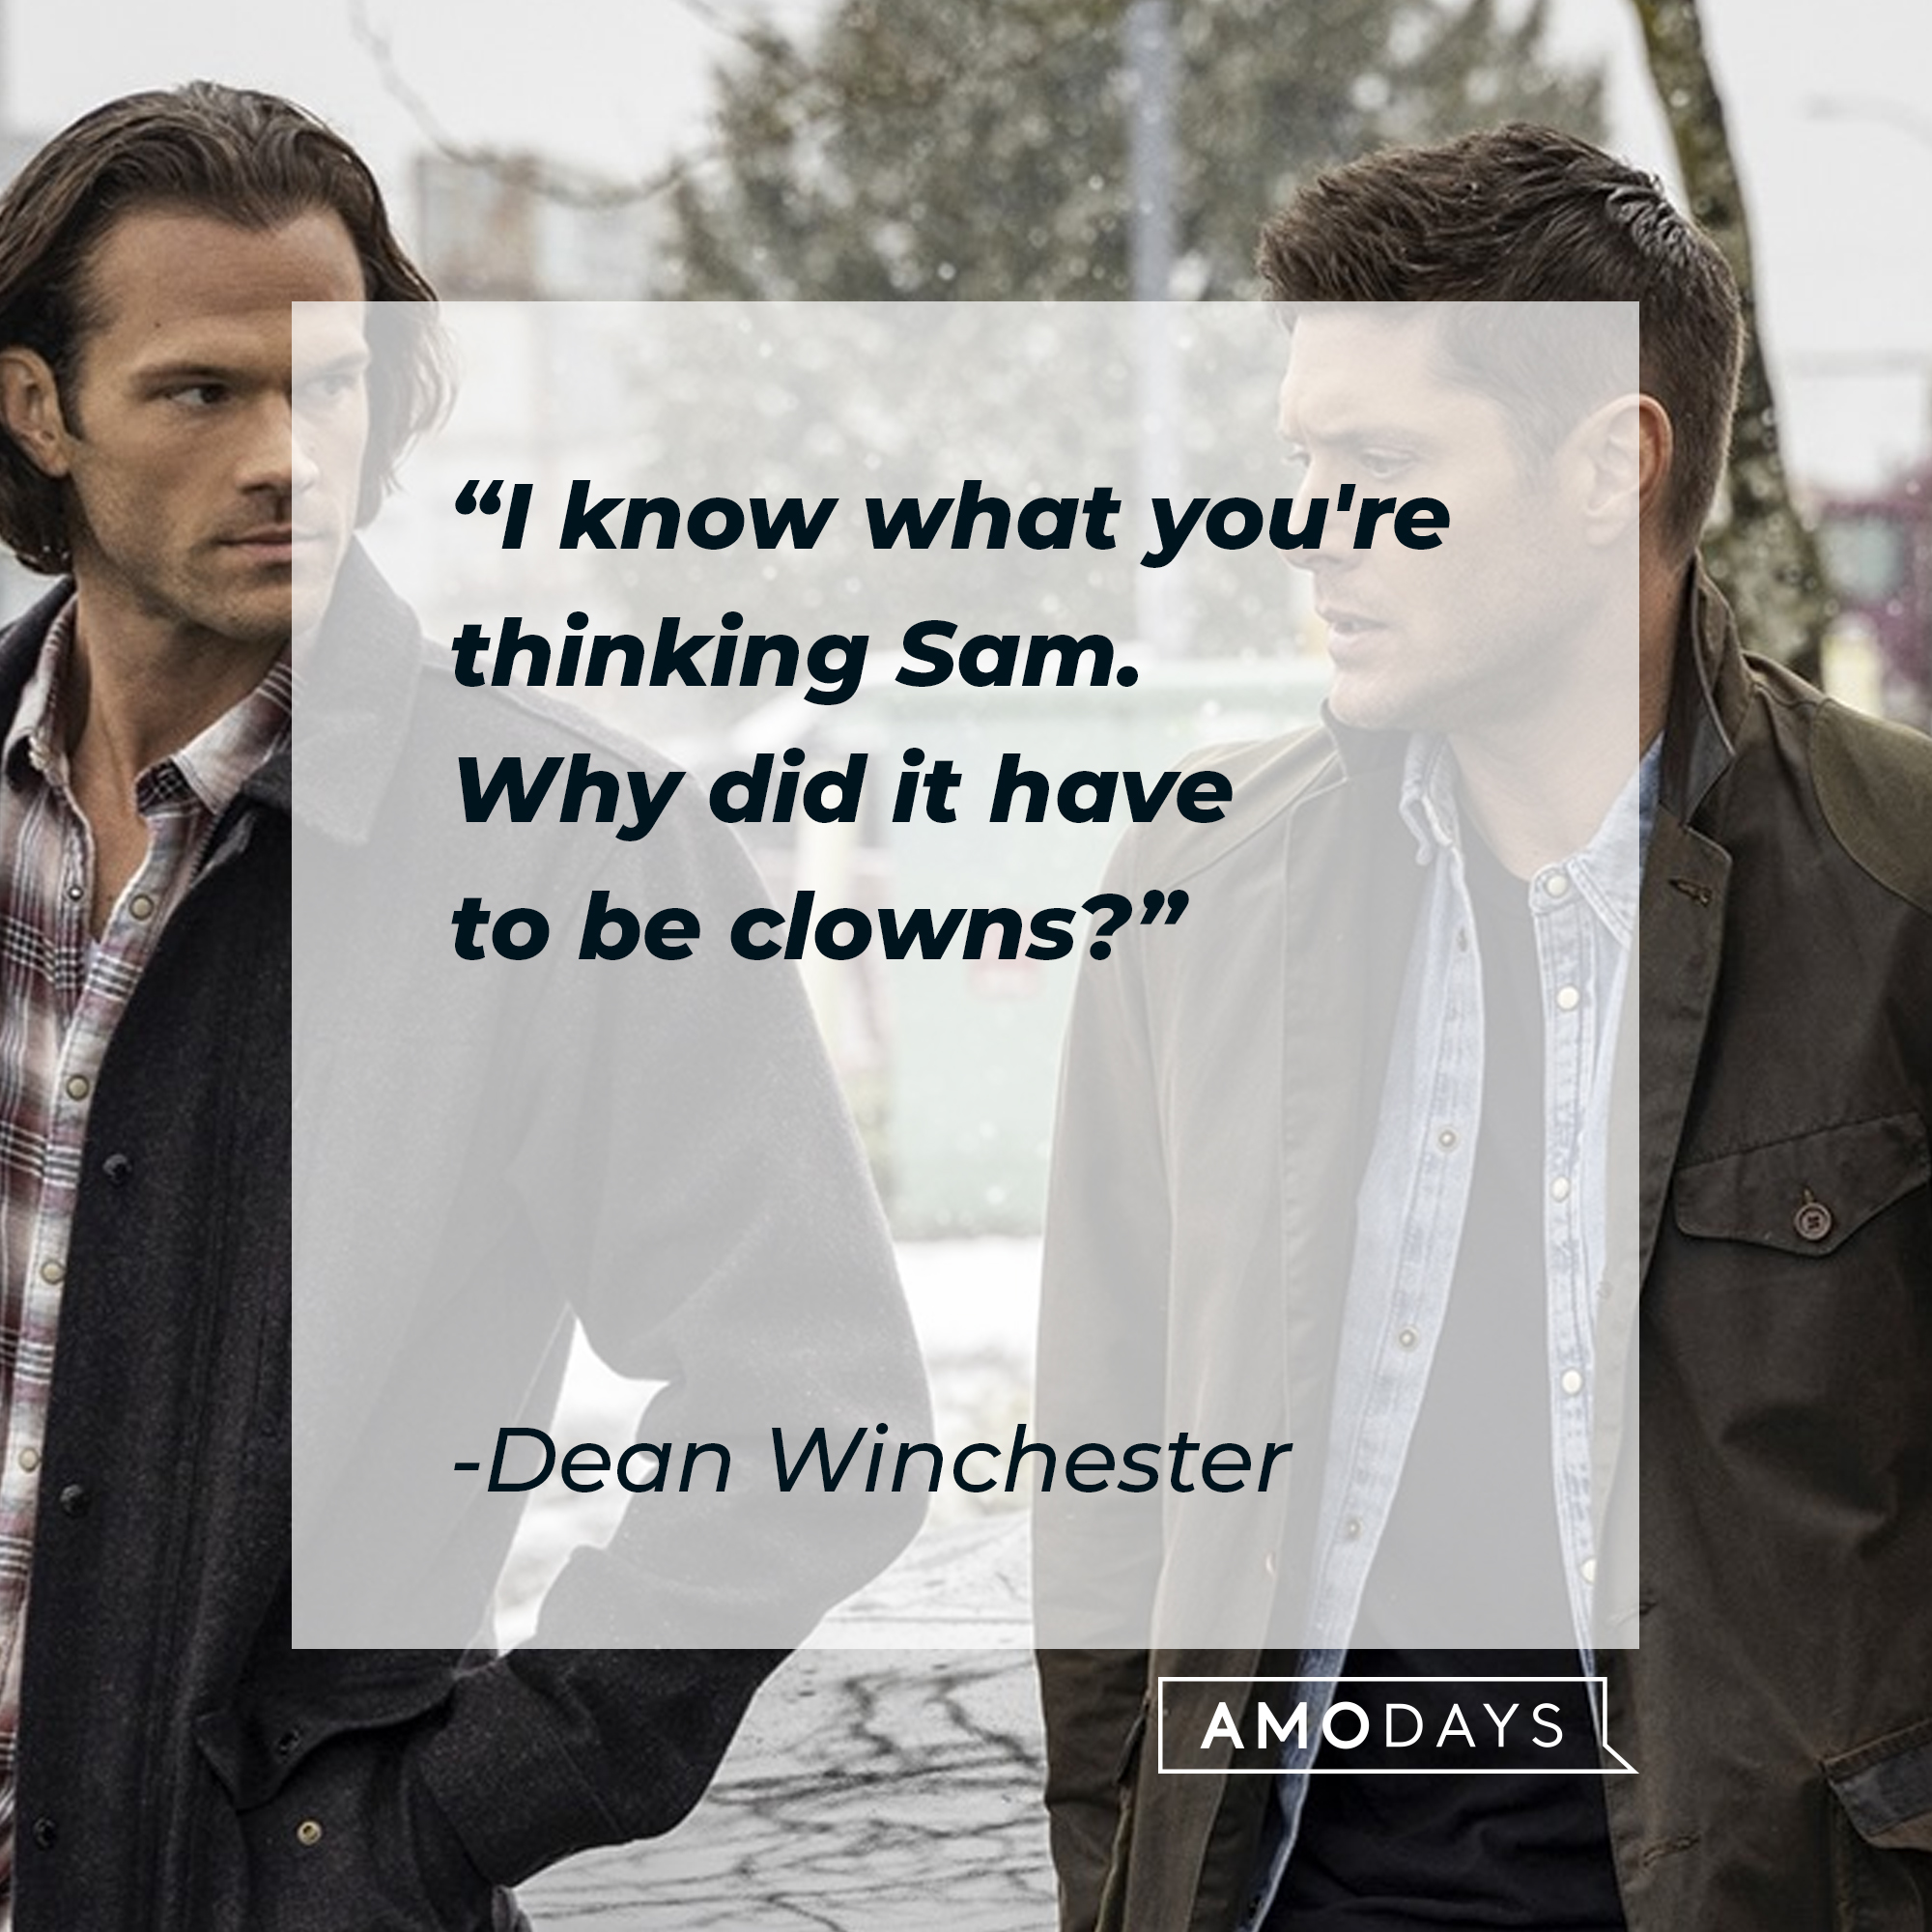 Dean Winchester's quote: "I know what you're thinking Sam. Why did it have to be clowns?" | Source: facebook.com/Supernatural